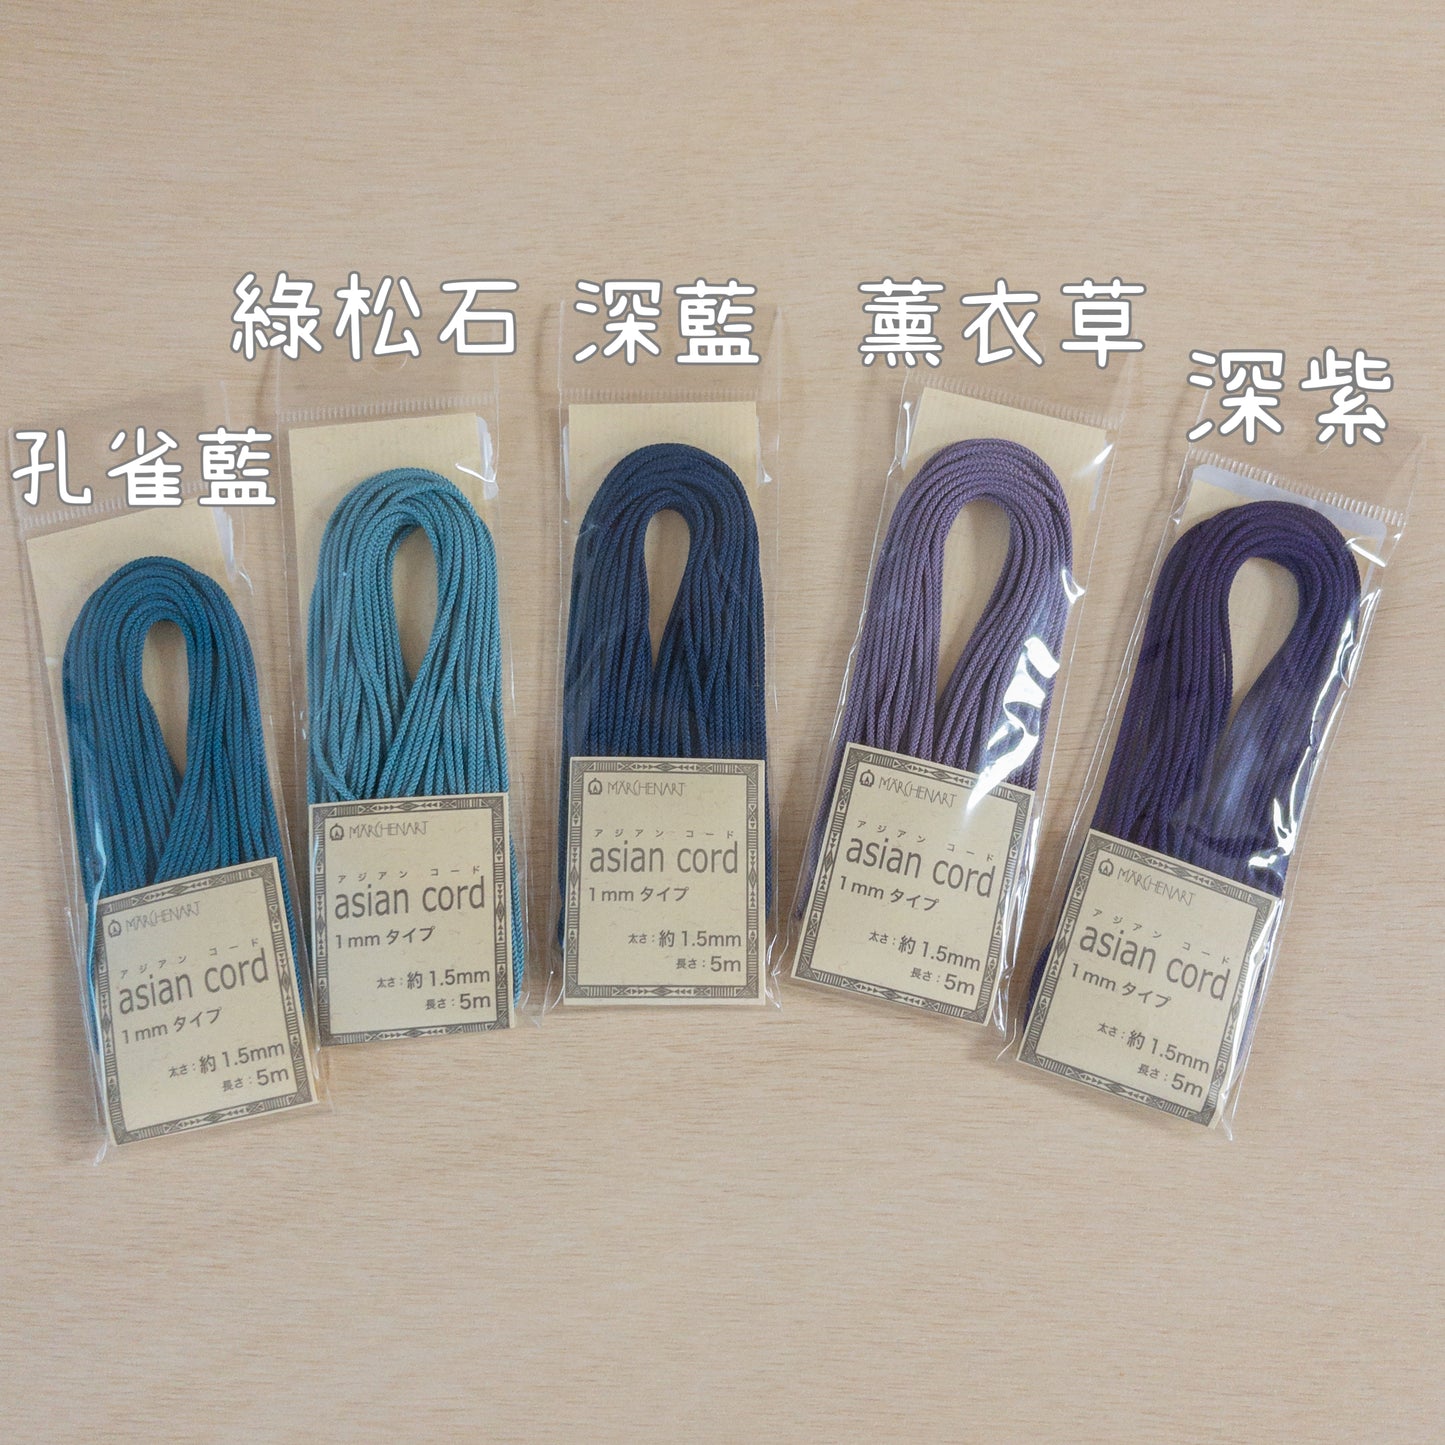 1mm polyester rope 編織繩 - 15 colors